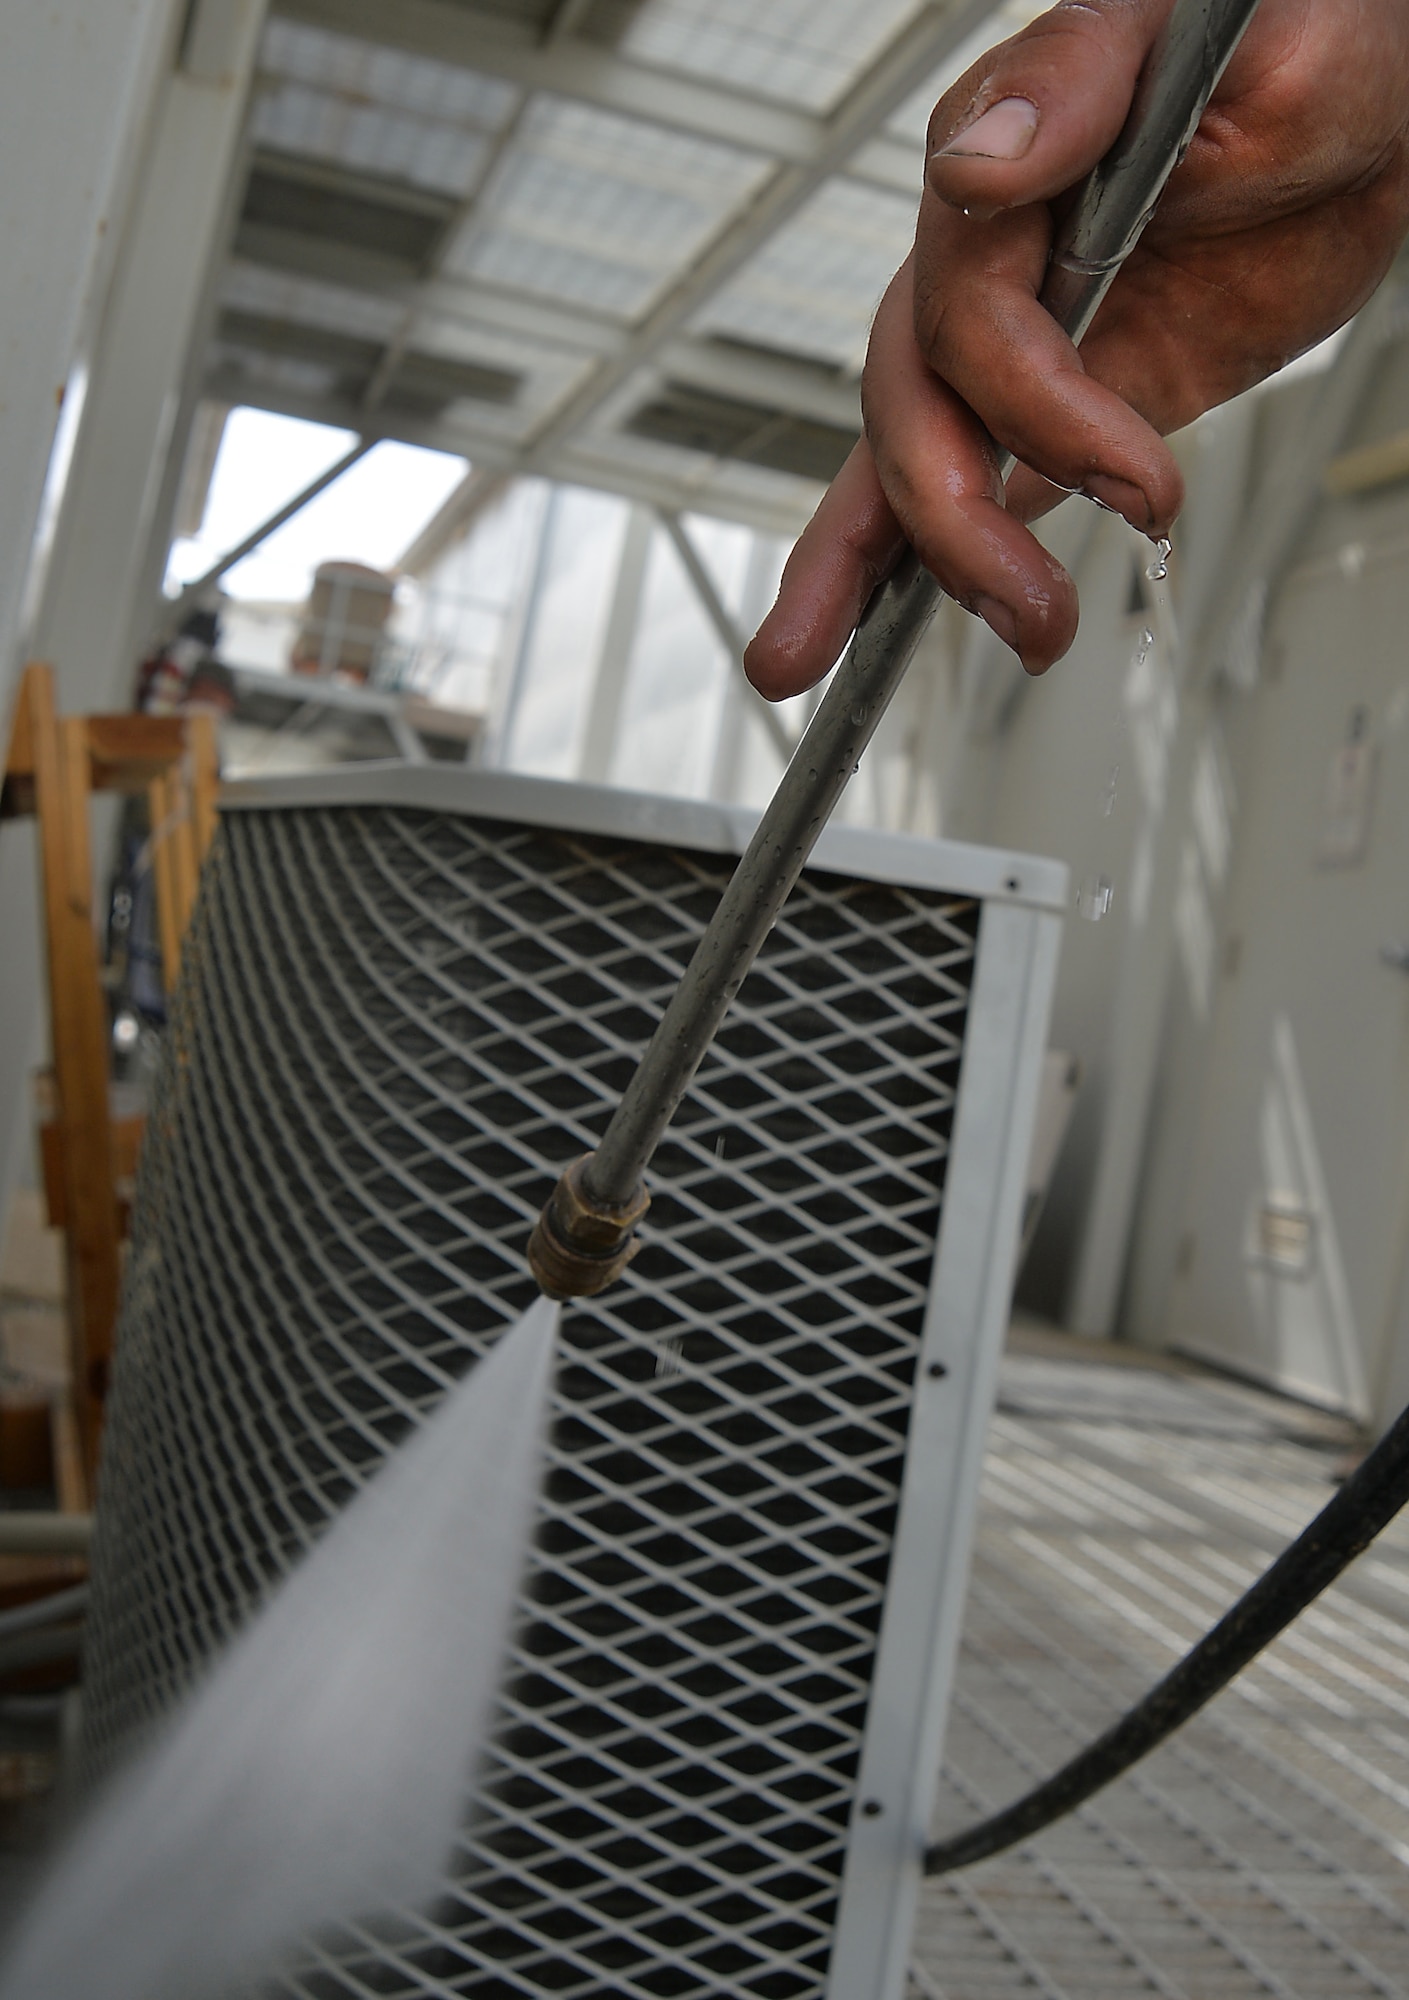 Senior Airman Brandon, heating, ventilation and air conditioning journeyman, pressure washes a split air conditioning unit at an undisclosed location in Southwest Asia May 7, 2015. HVAC Airmen are responsible for installing, operating, maintaining, and repairing heating, ventilation, air conditioning and refrigeration systems, combustion equipment, and industrial air compressors. (U.S. Air Force photo/Tech. Sgt. Jeff Andrejcik)